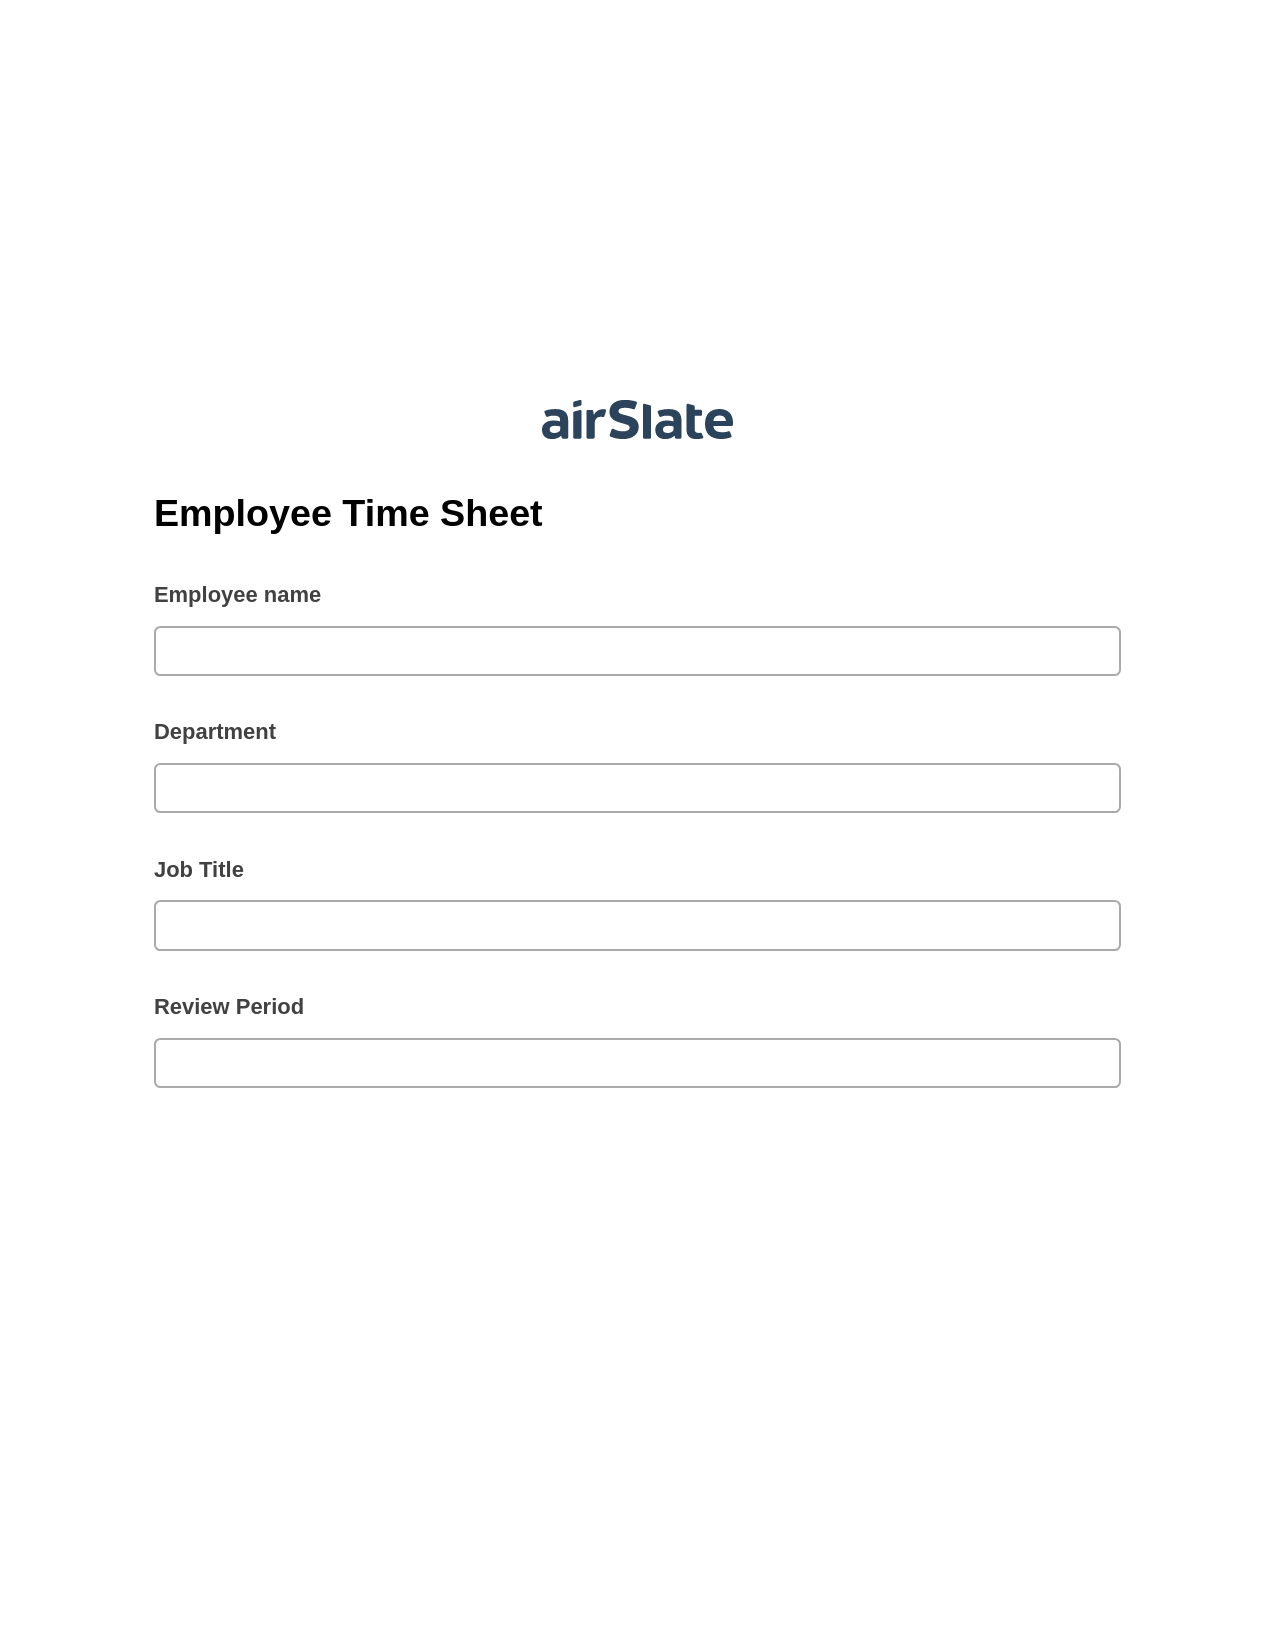 Multirole Employee Time Sheet Pre-fill from MySQL Bot, Send a Slate with Roles Bot, Archive to OneDrive Bot